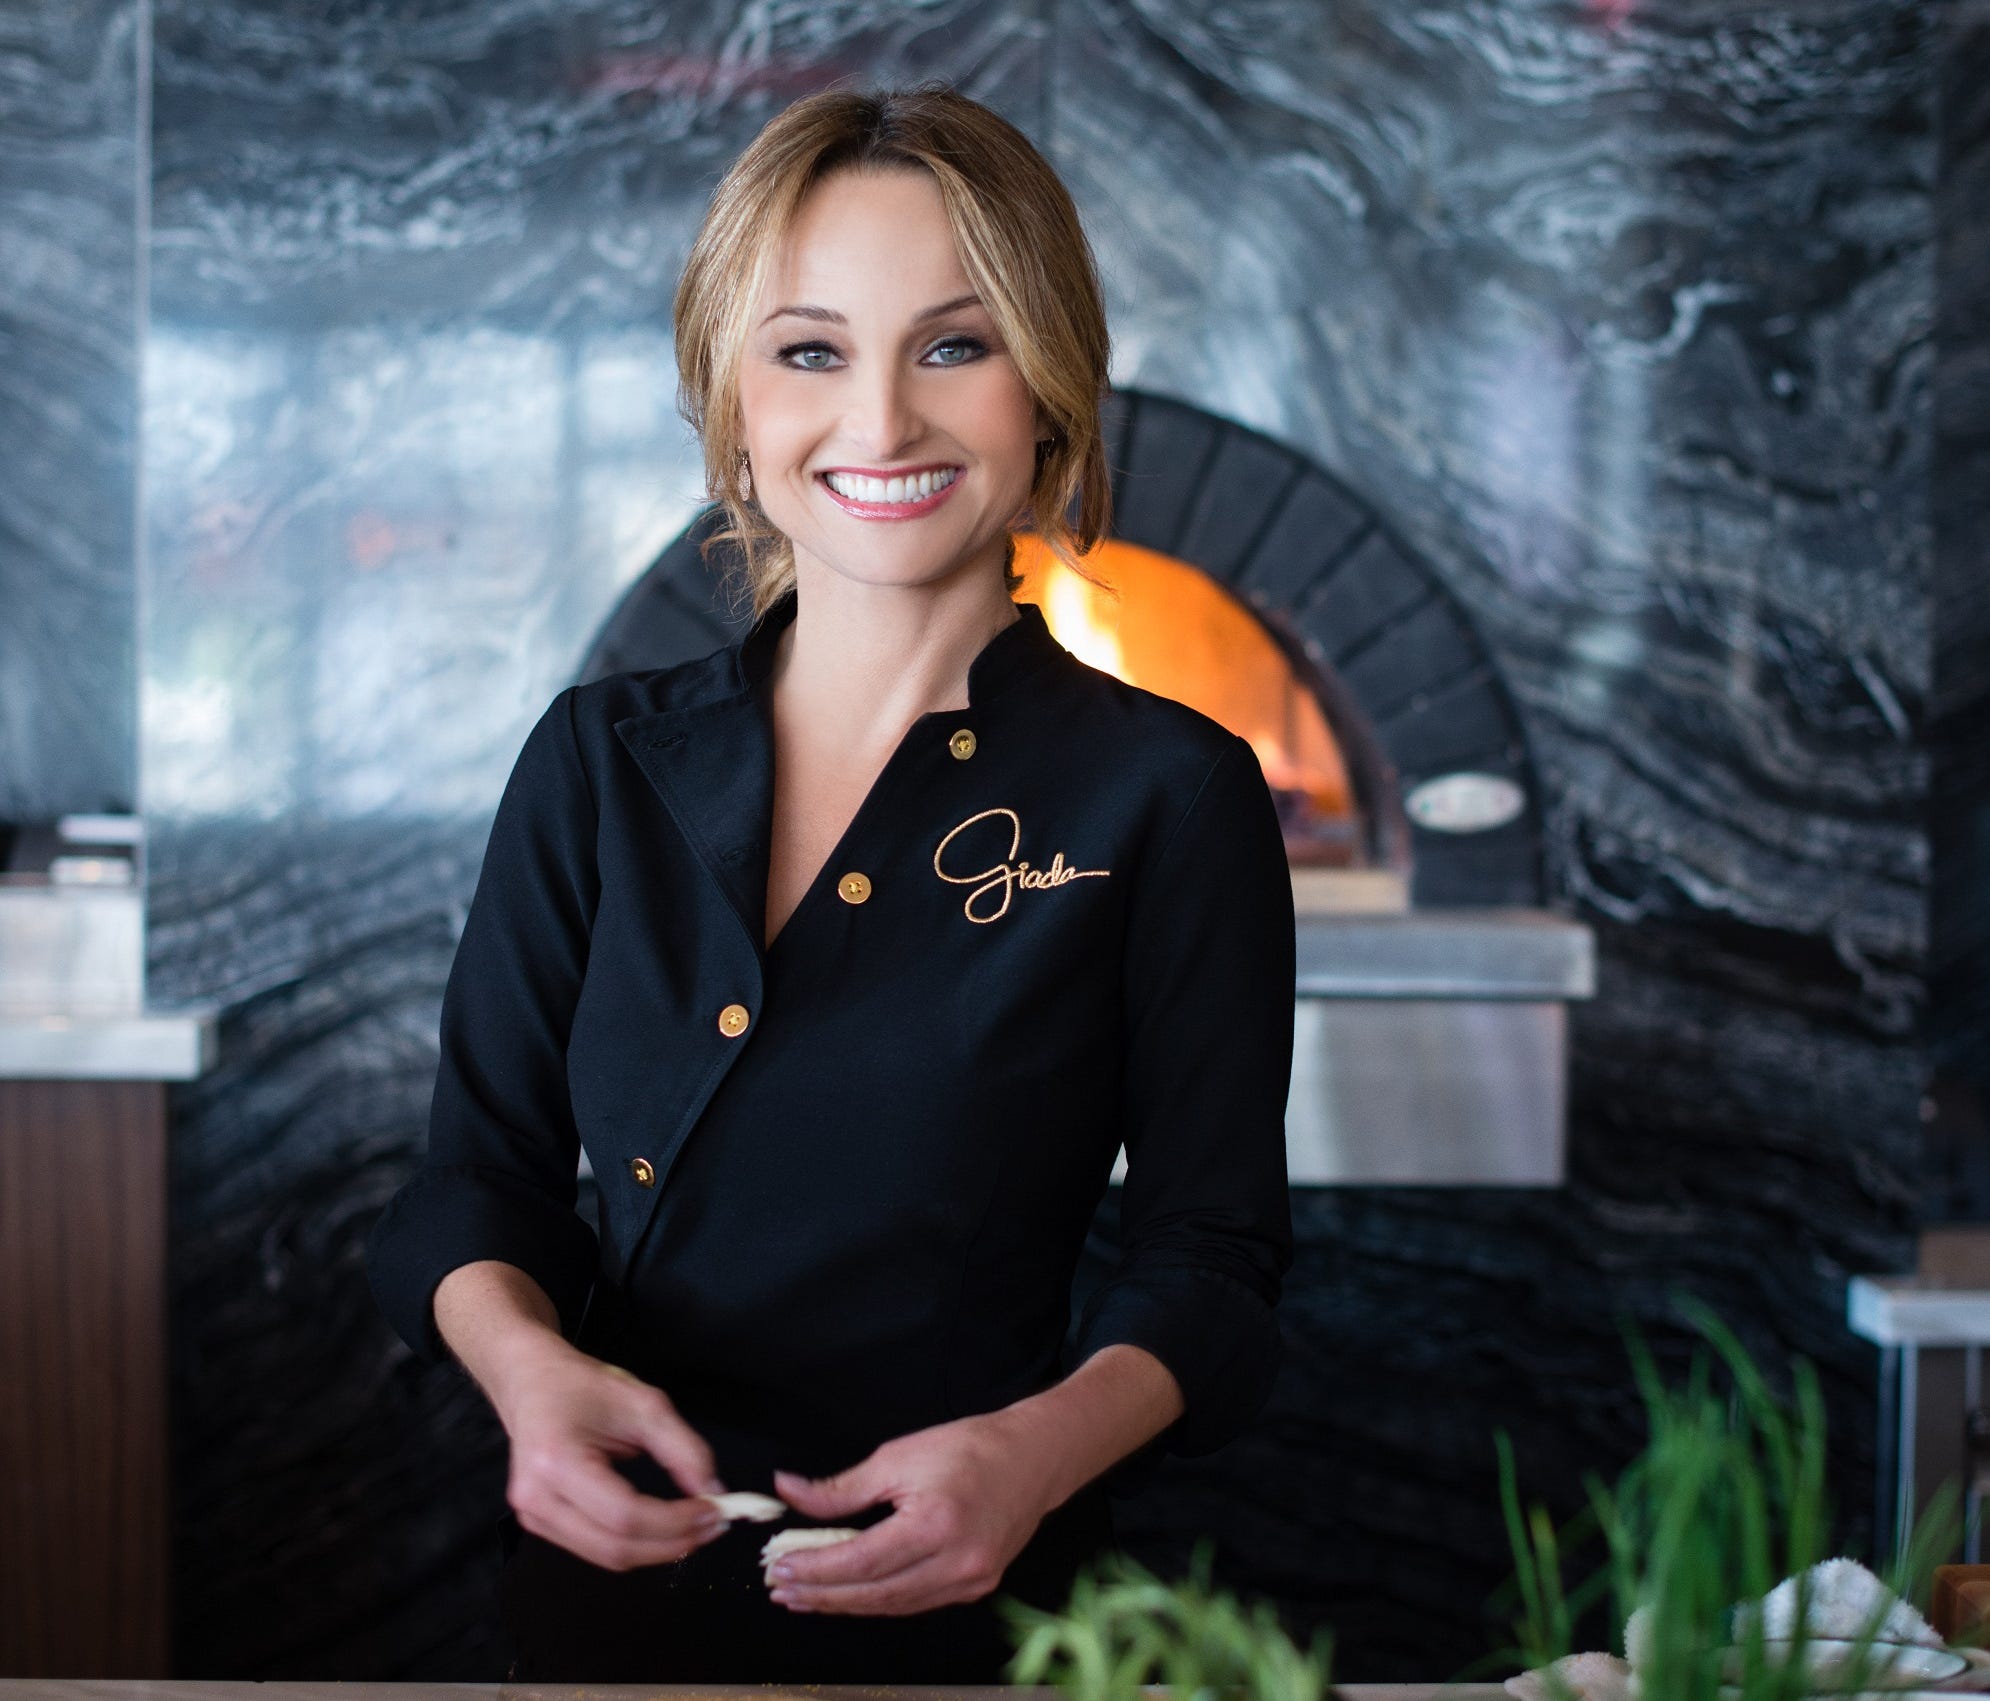 Giada De Laurentiis debuted her first restaurant, GIADA at The Cromwell, in 2014.